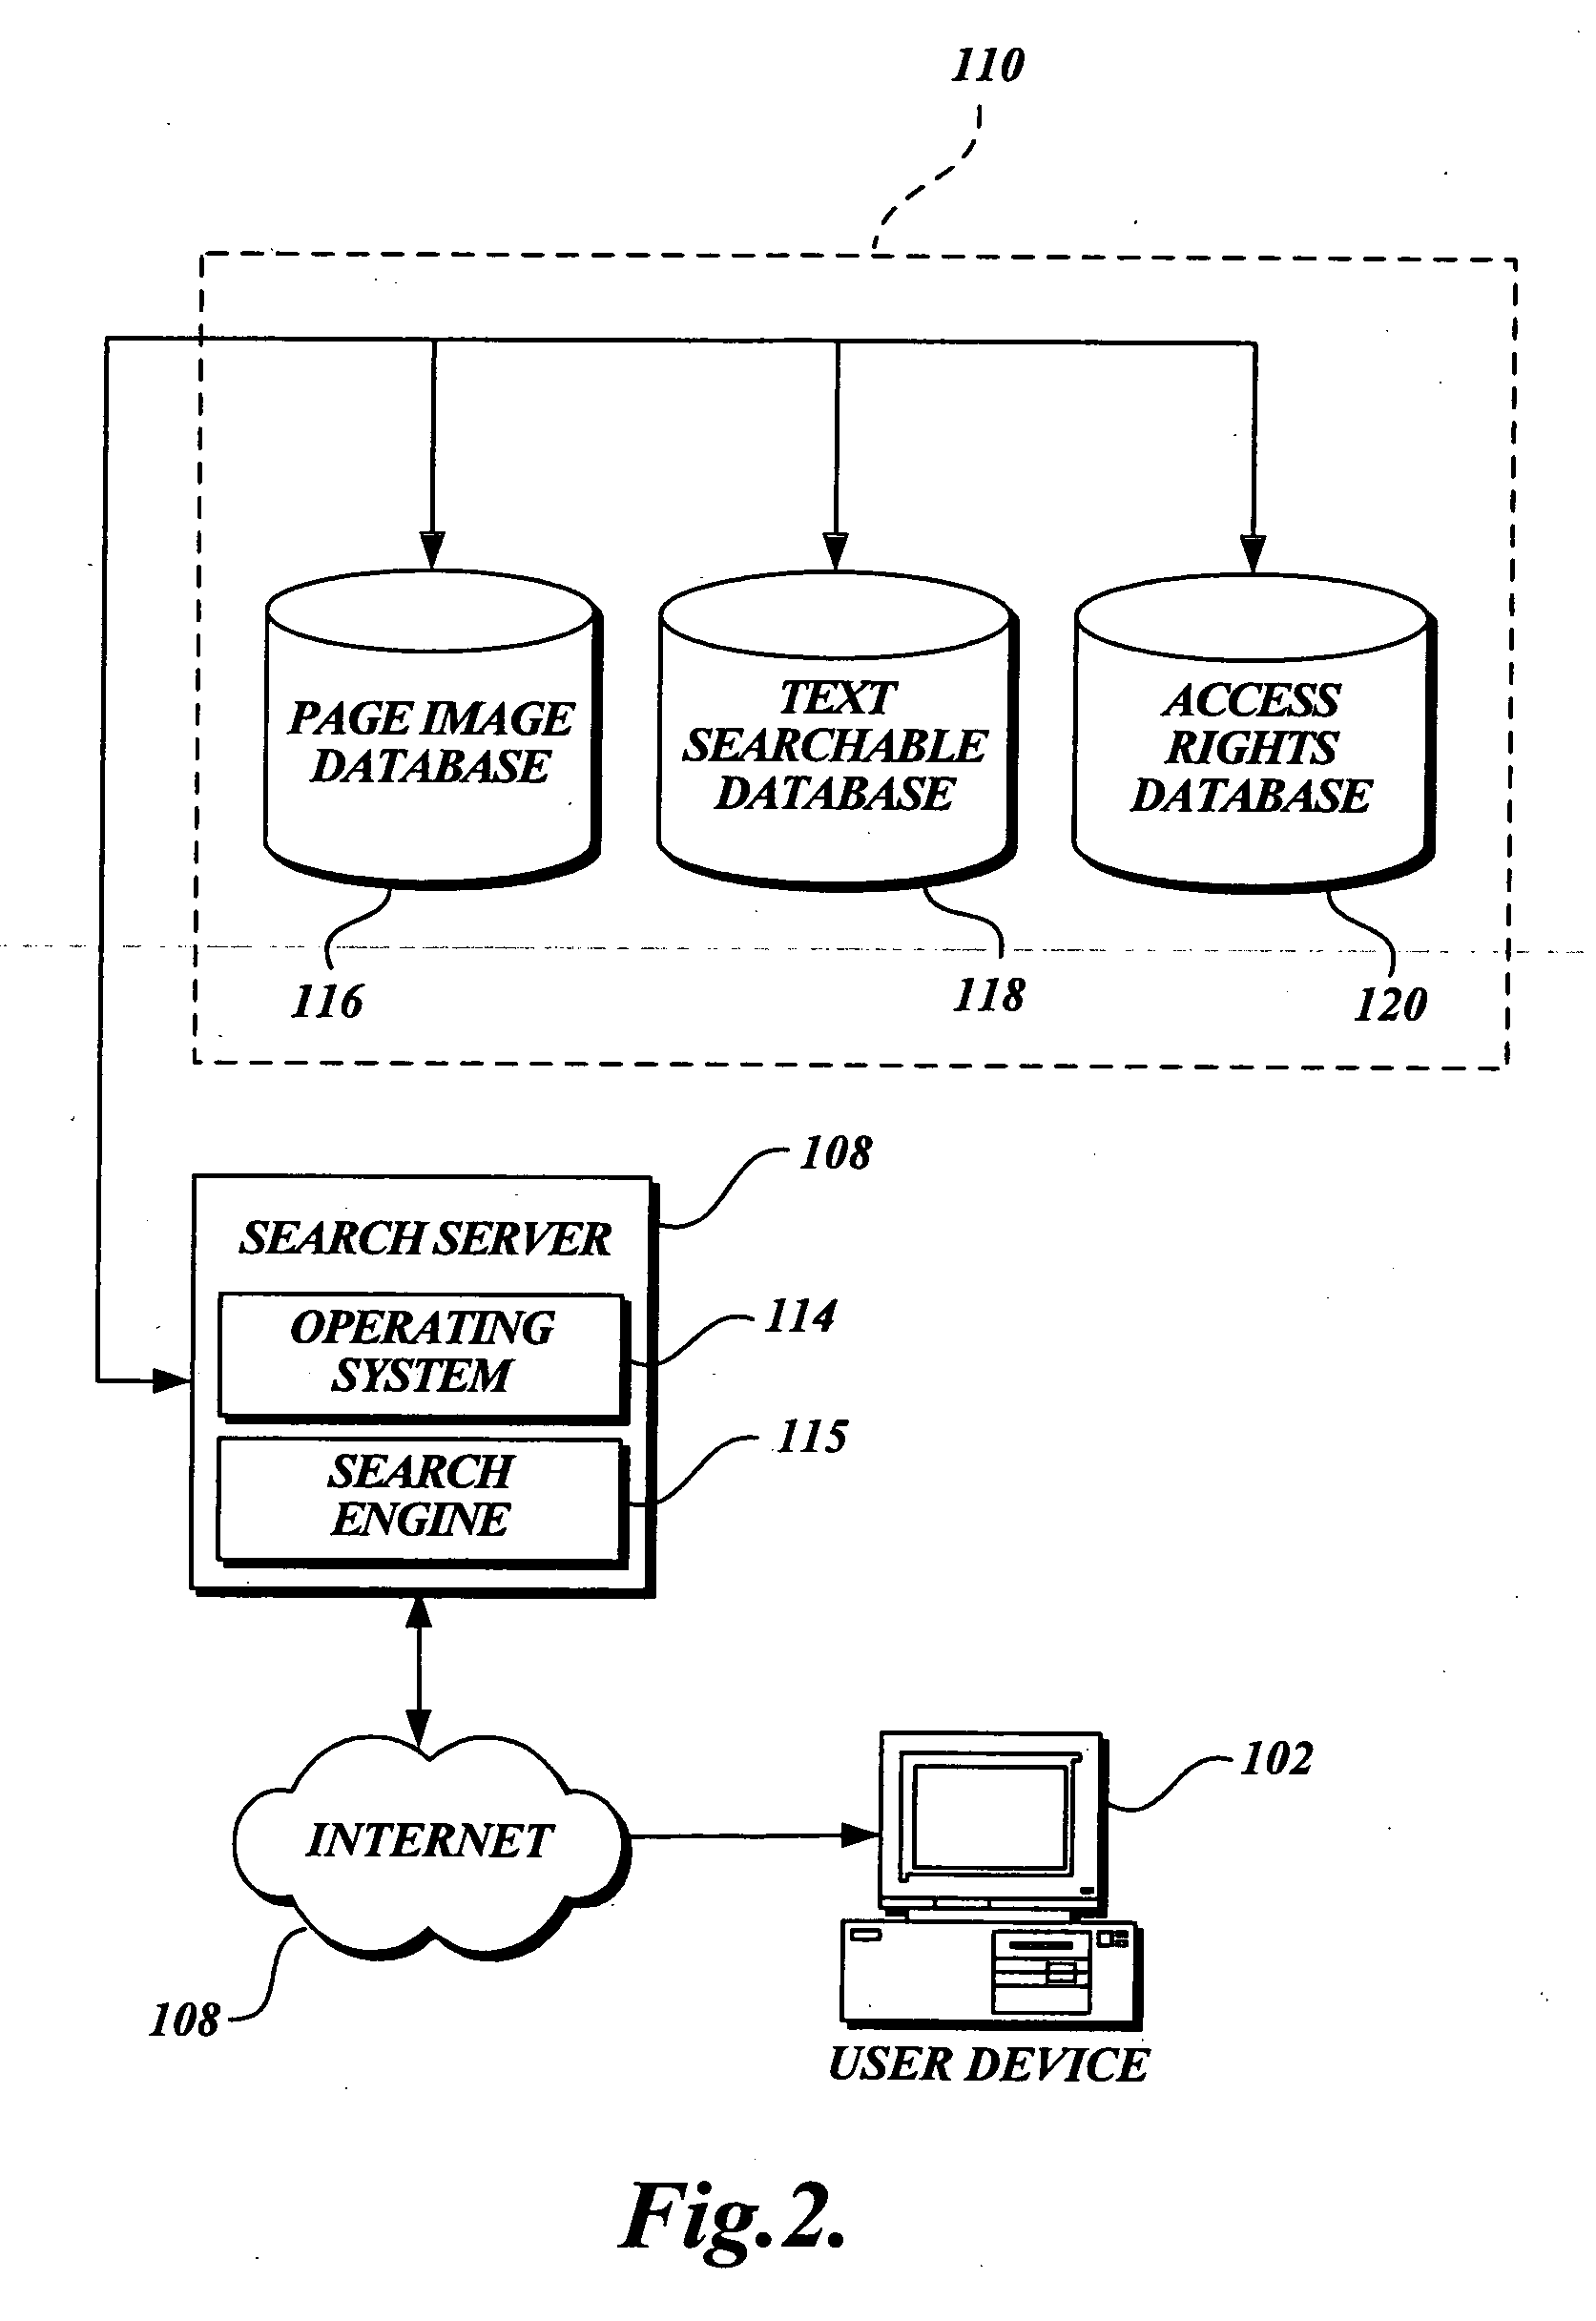 Automated monitoring and control of access to content from a source